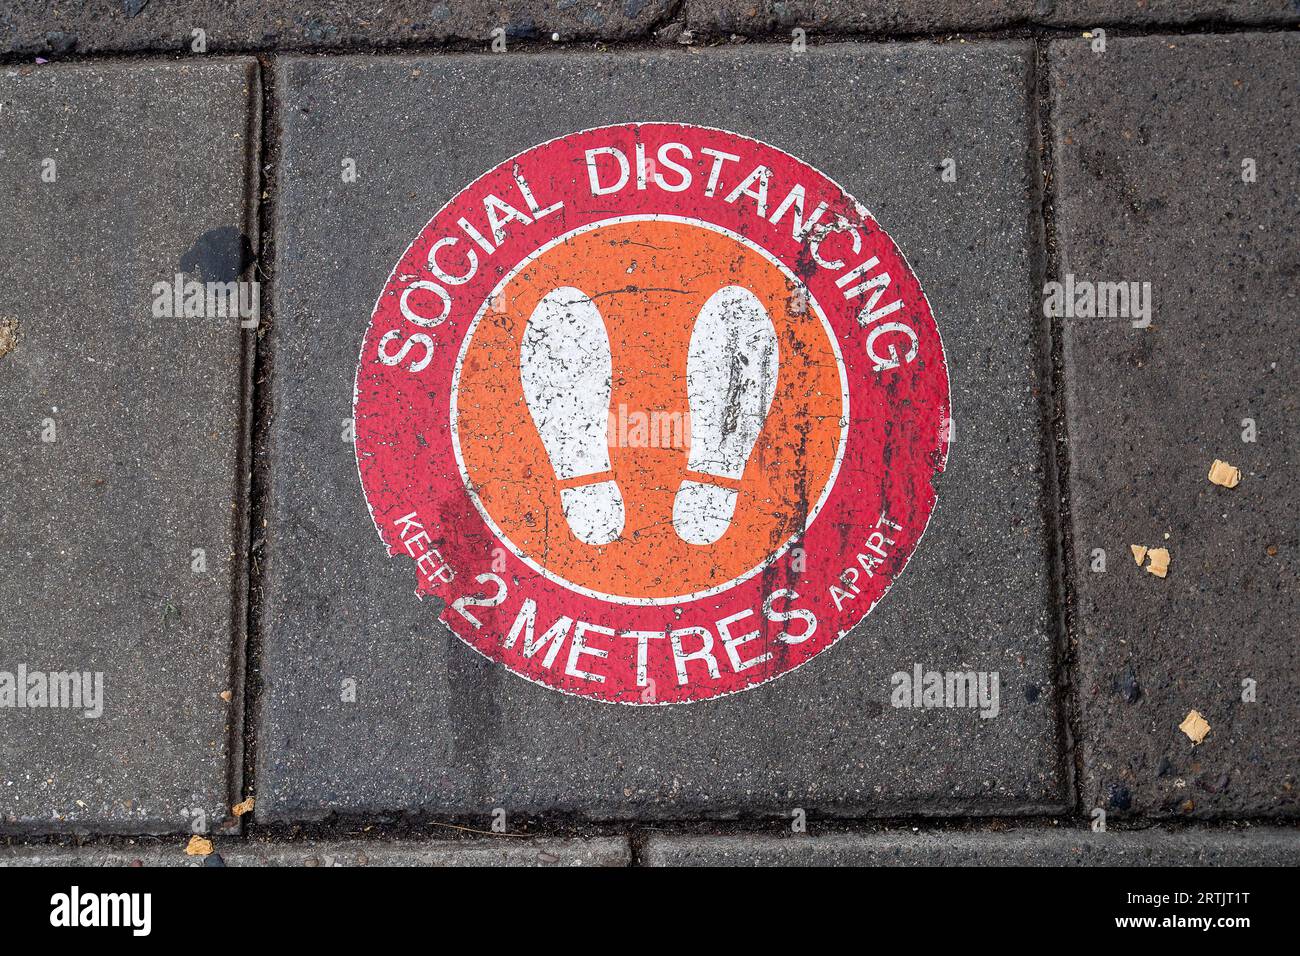 Windsor, Berkshire, UK. 2nd September, 2023. A legacy Social Distancing sign on a pavement in Windsor, Berkshire. A new Covid-19 variant BA.2.86 known as Pirola is said to be spreading in the UK. Credit: Maureen McLean/Alamy Stock Photo